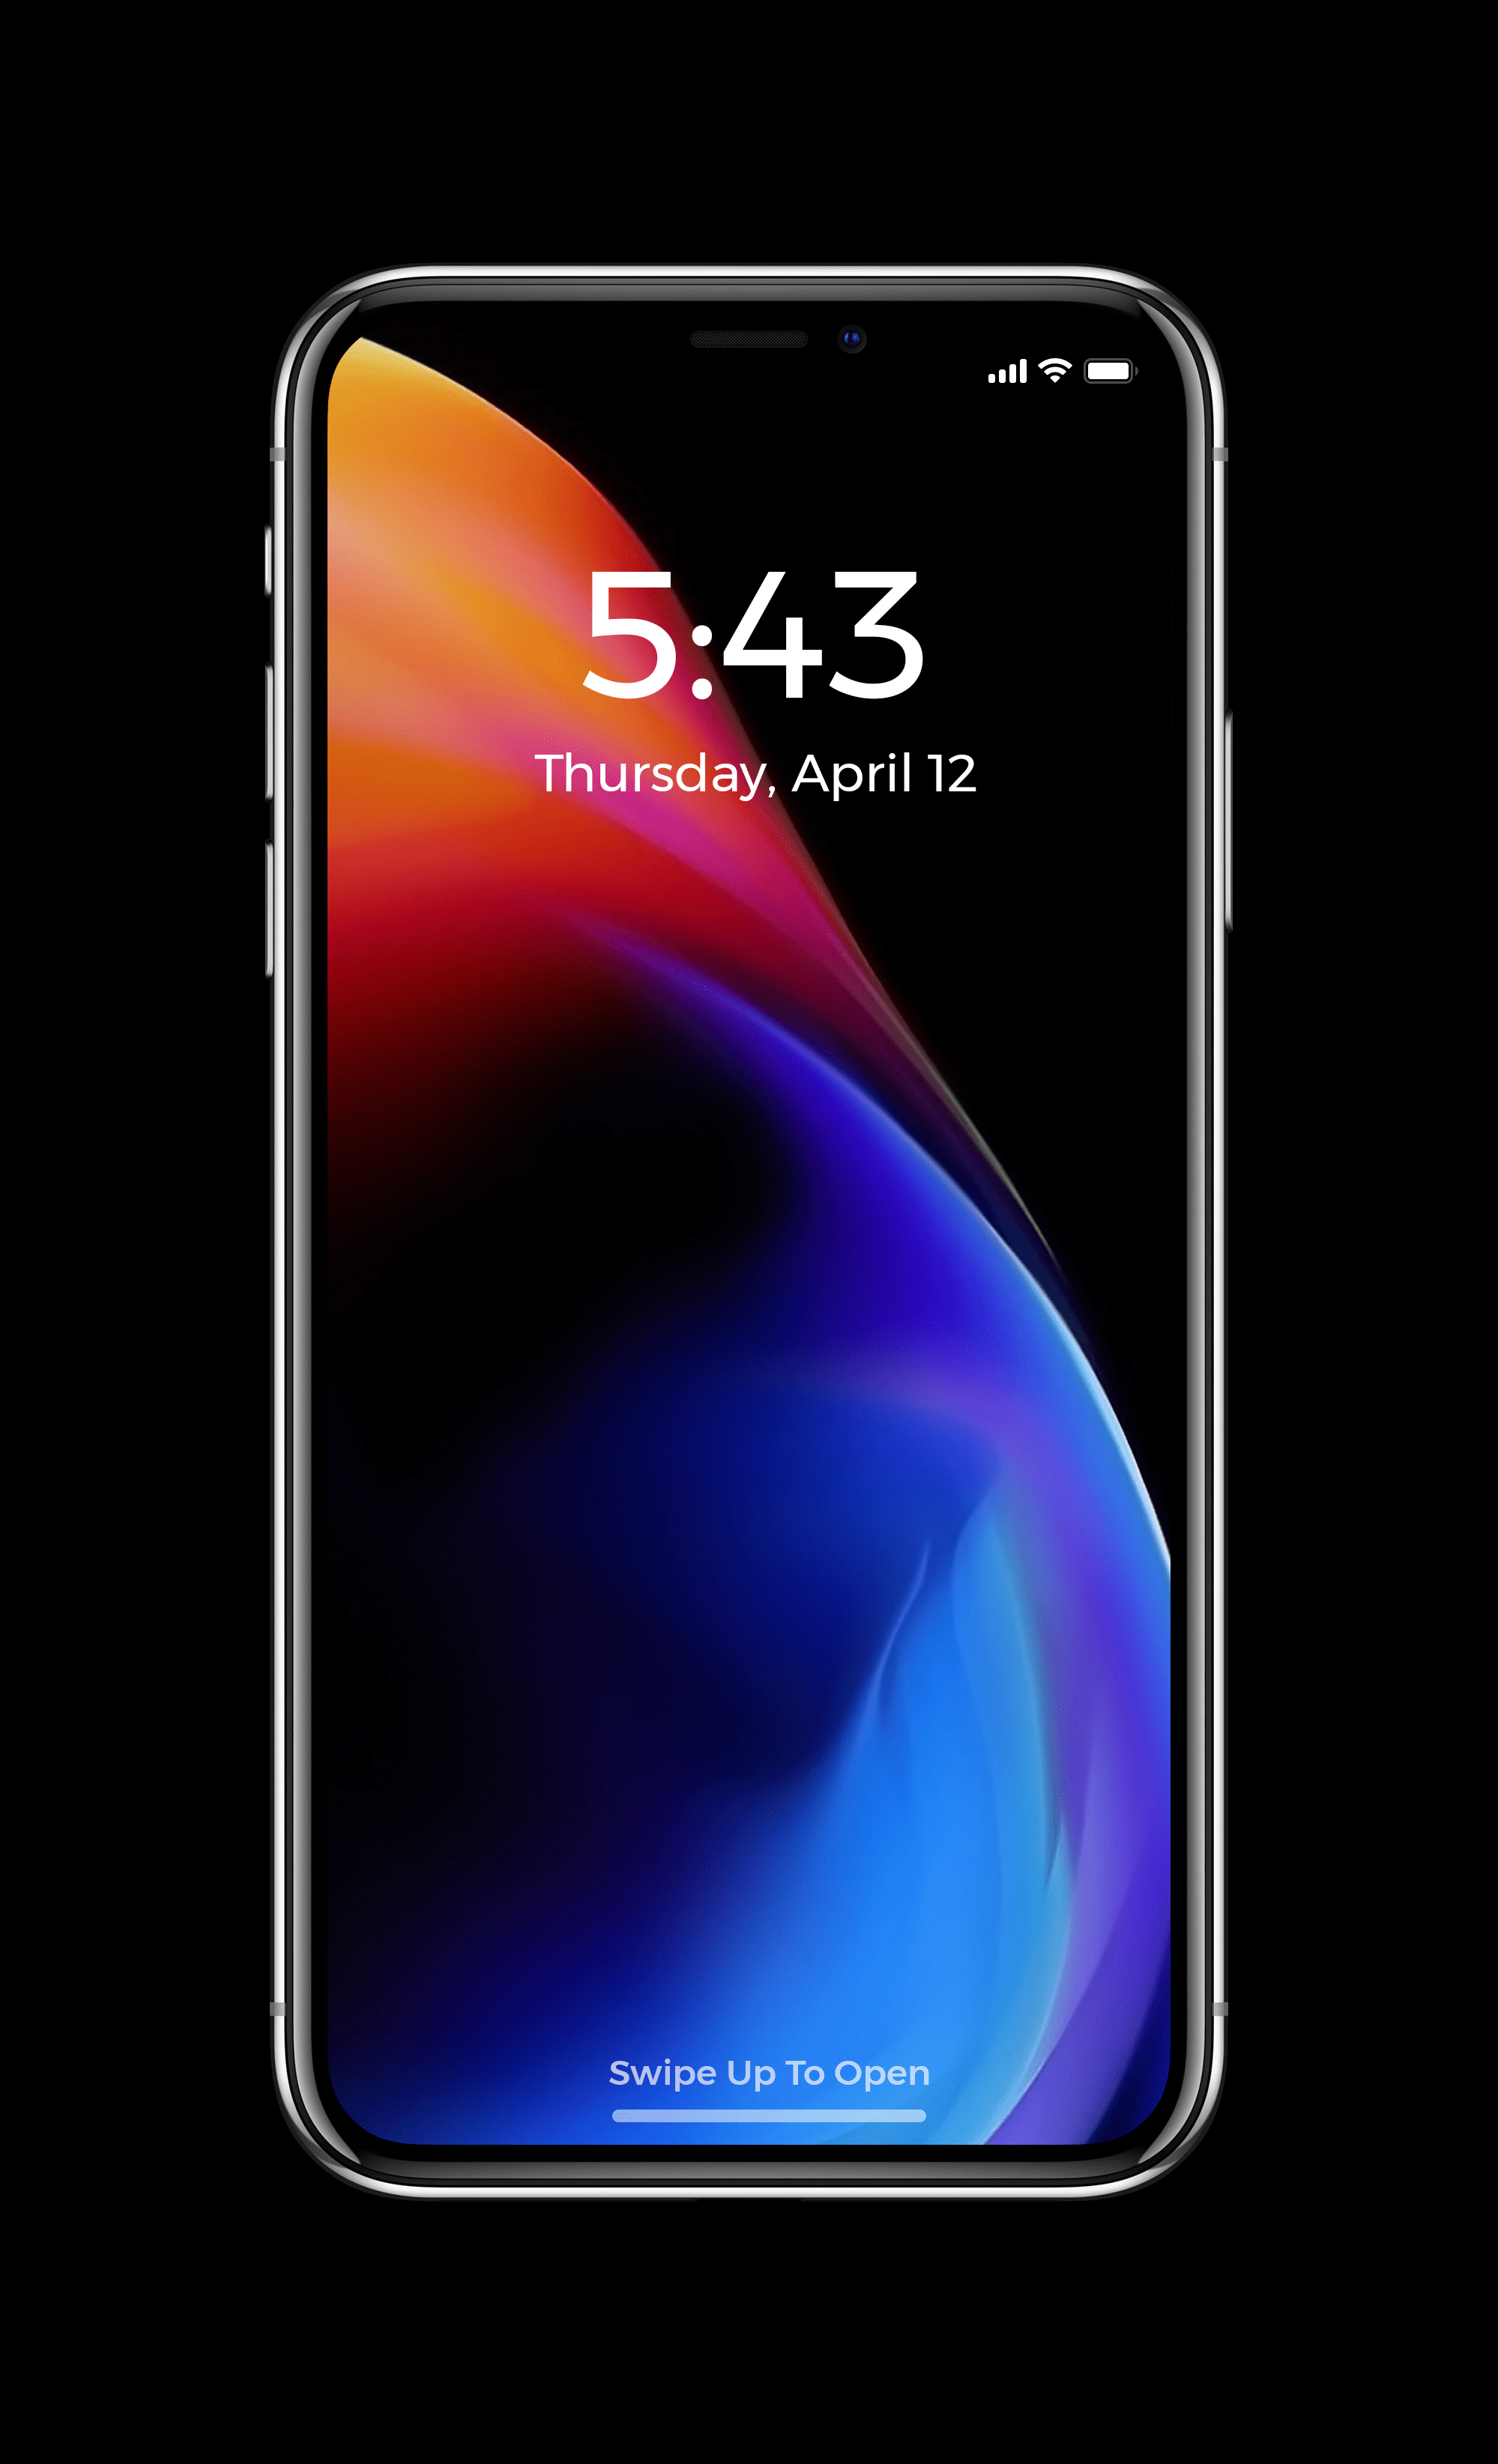 Unicorn Live Wallpaper - Iphone 8 Product Red , HD Wallpaper & Backgrounds